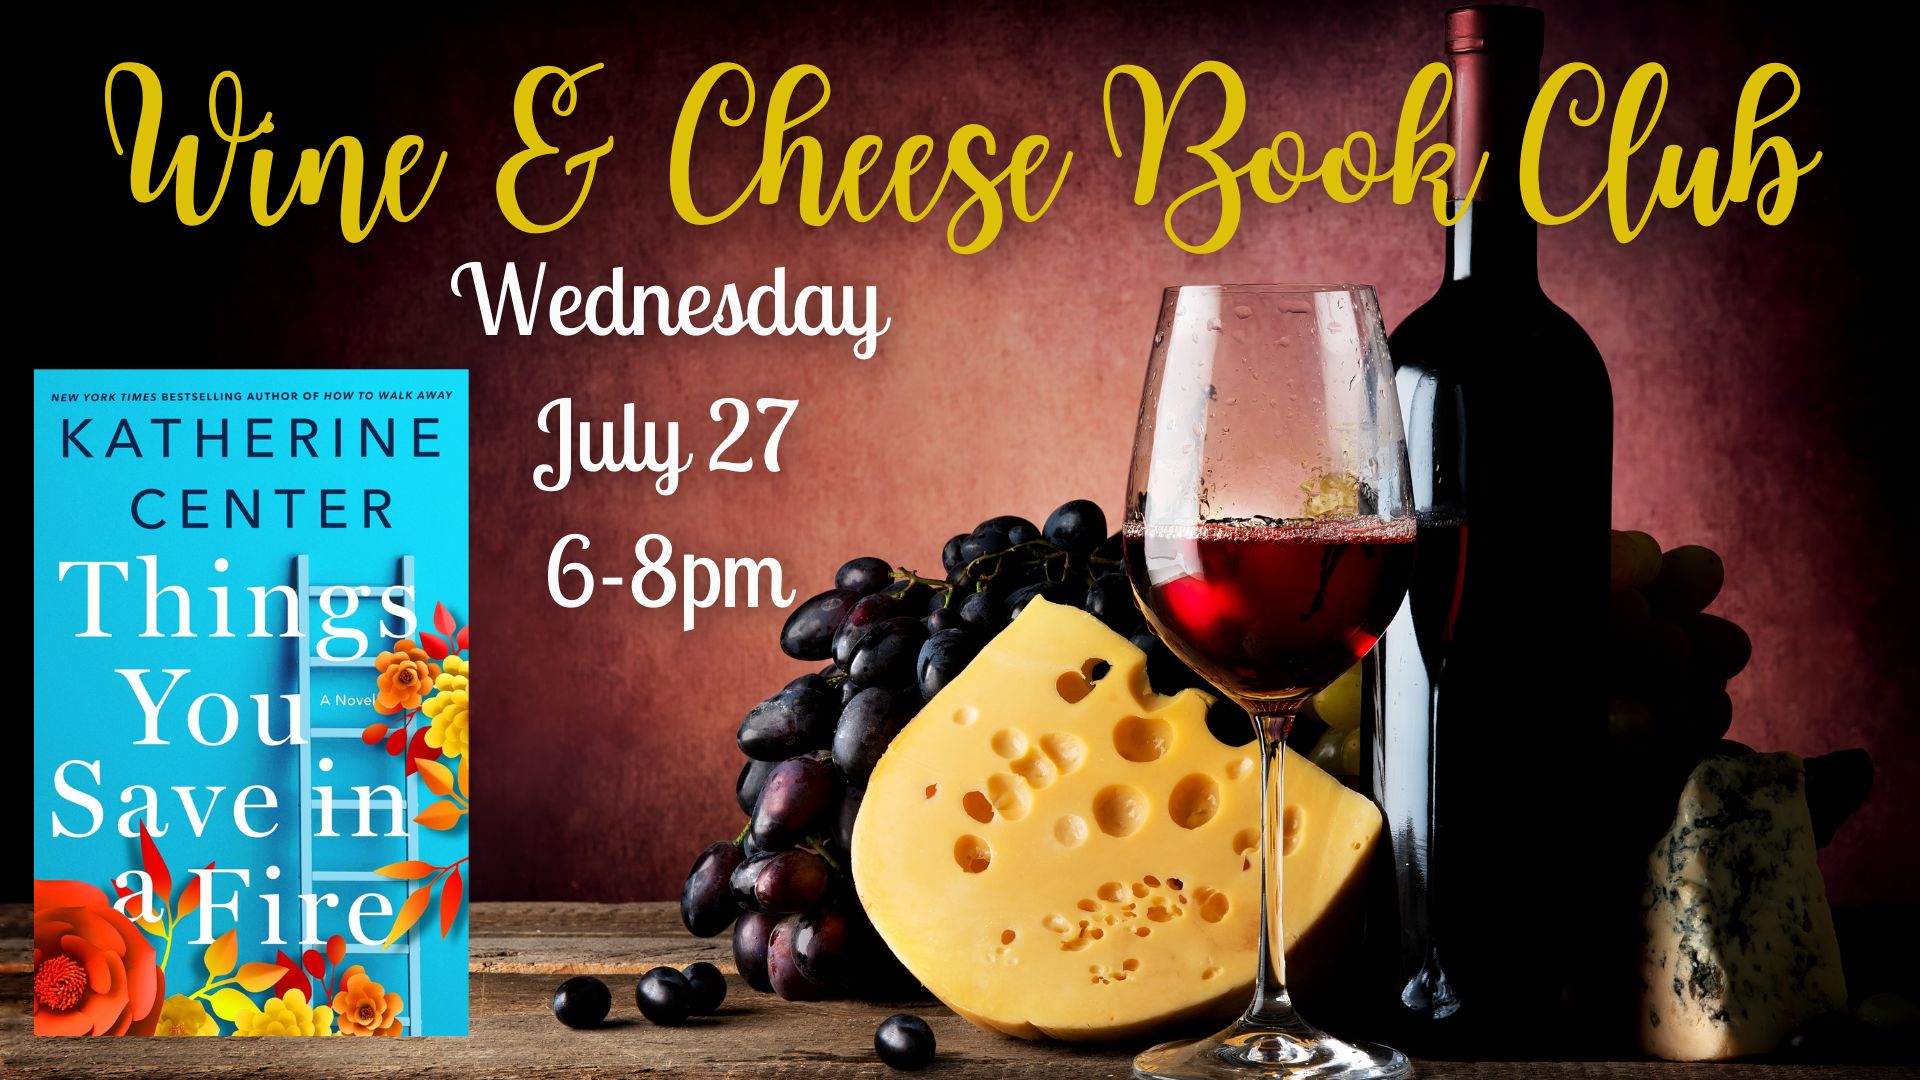 July wine and cheese book club